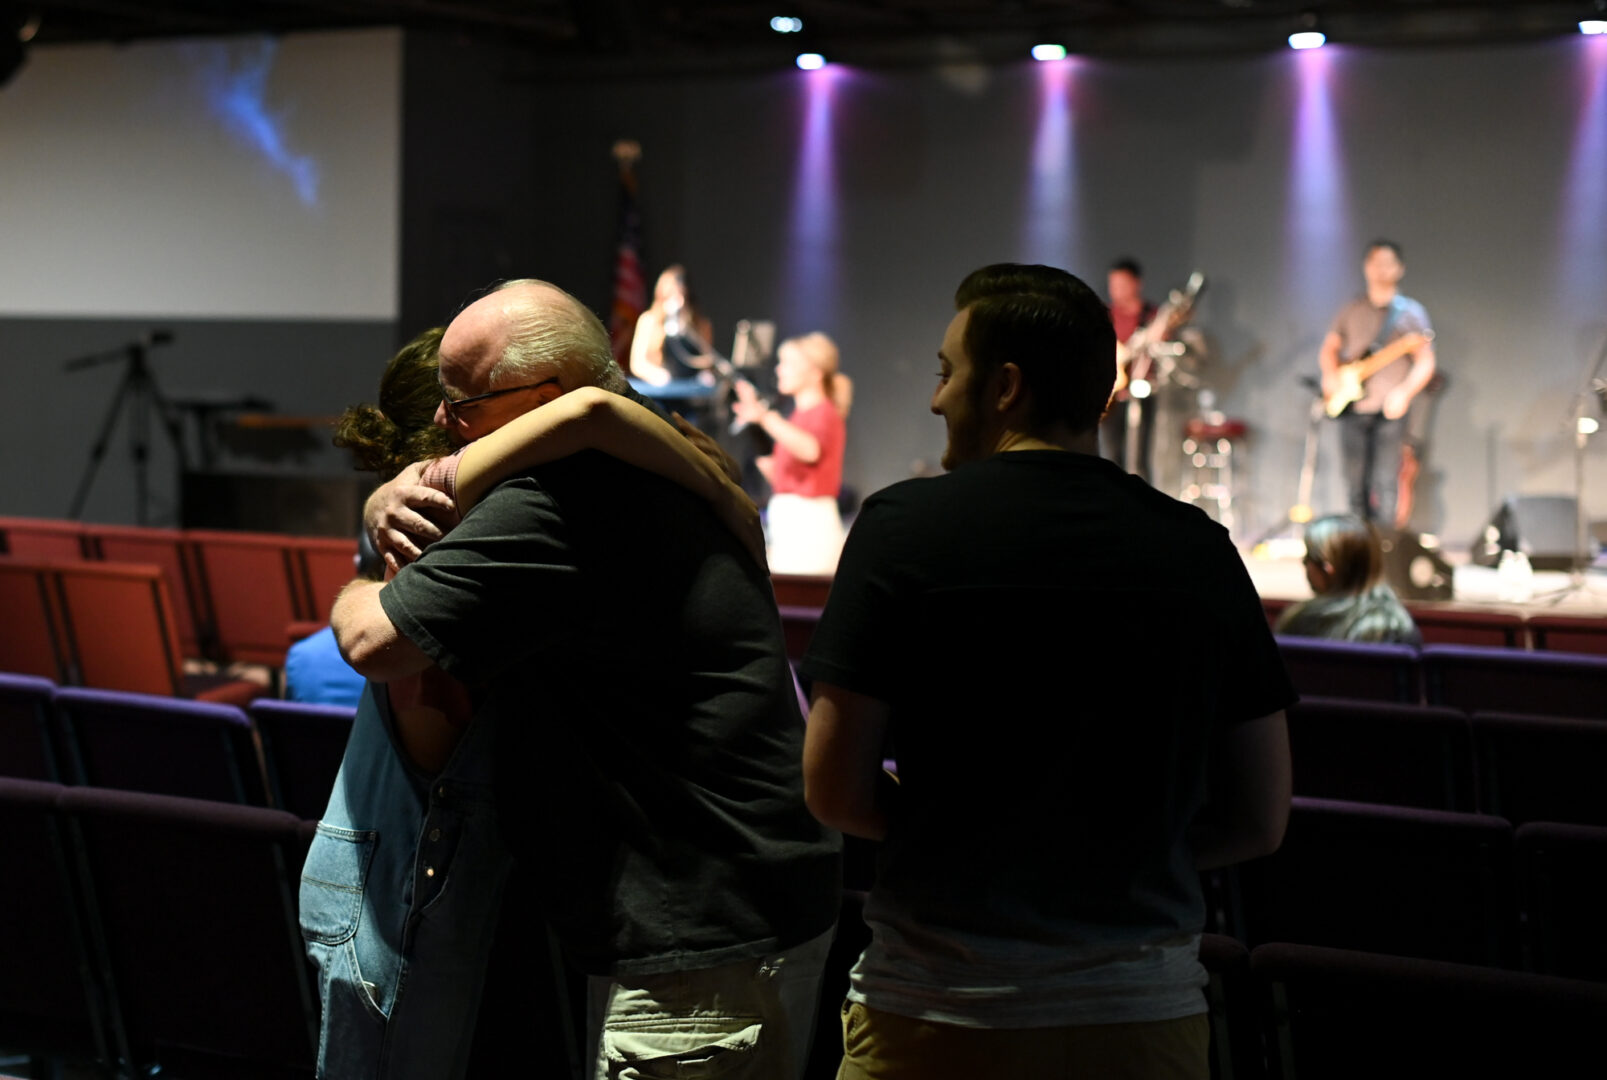 People greet each other before the start of the service at World Harvest Outreach church in Chambersburg on Sunday, Aug. 14, 2022. Jeremy Long - WITF